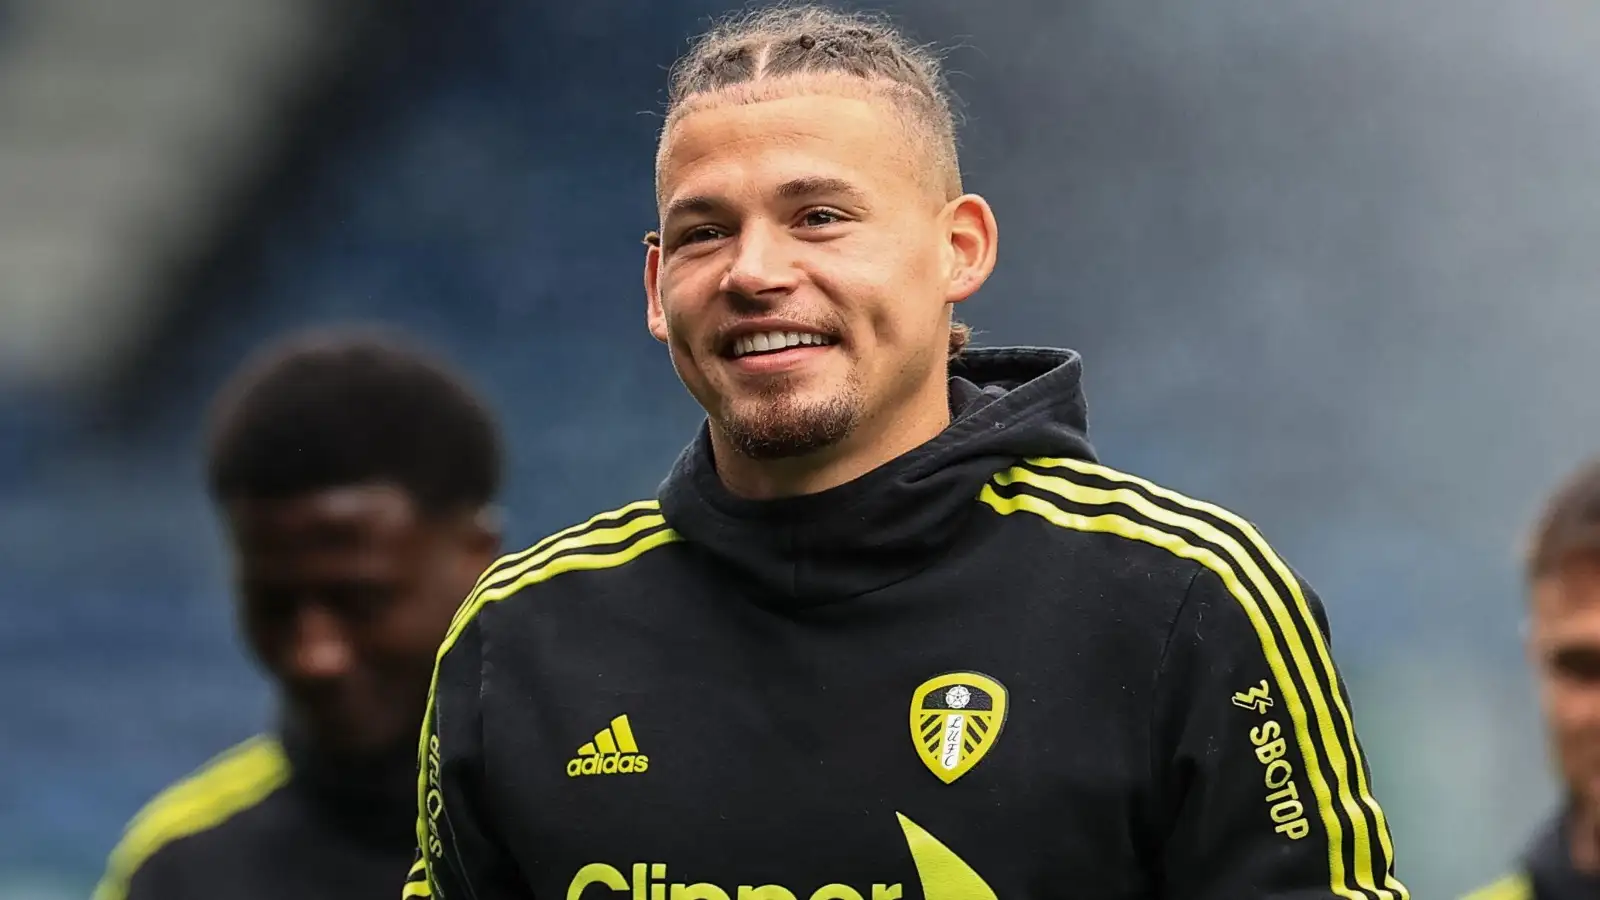 New Manchester City signing Kalvin Phillips before a match